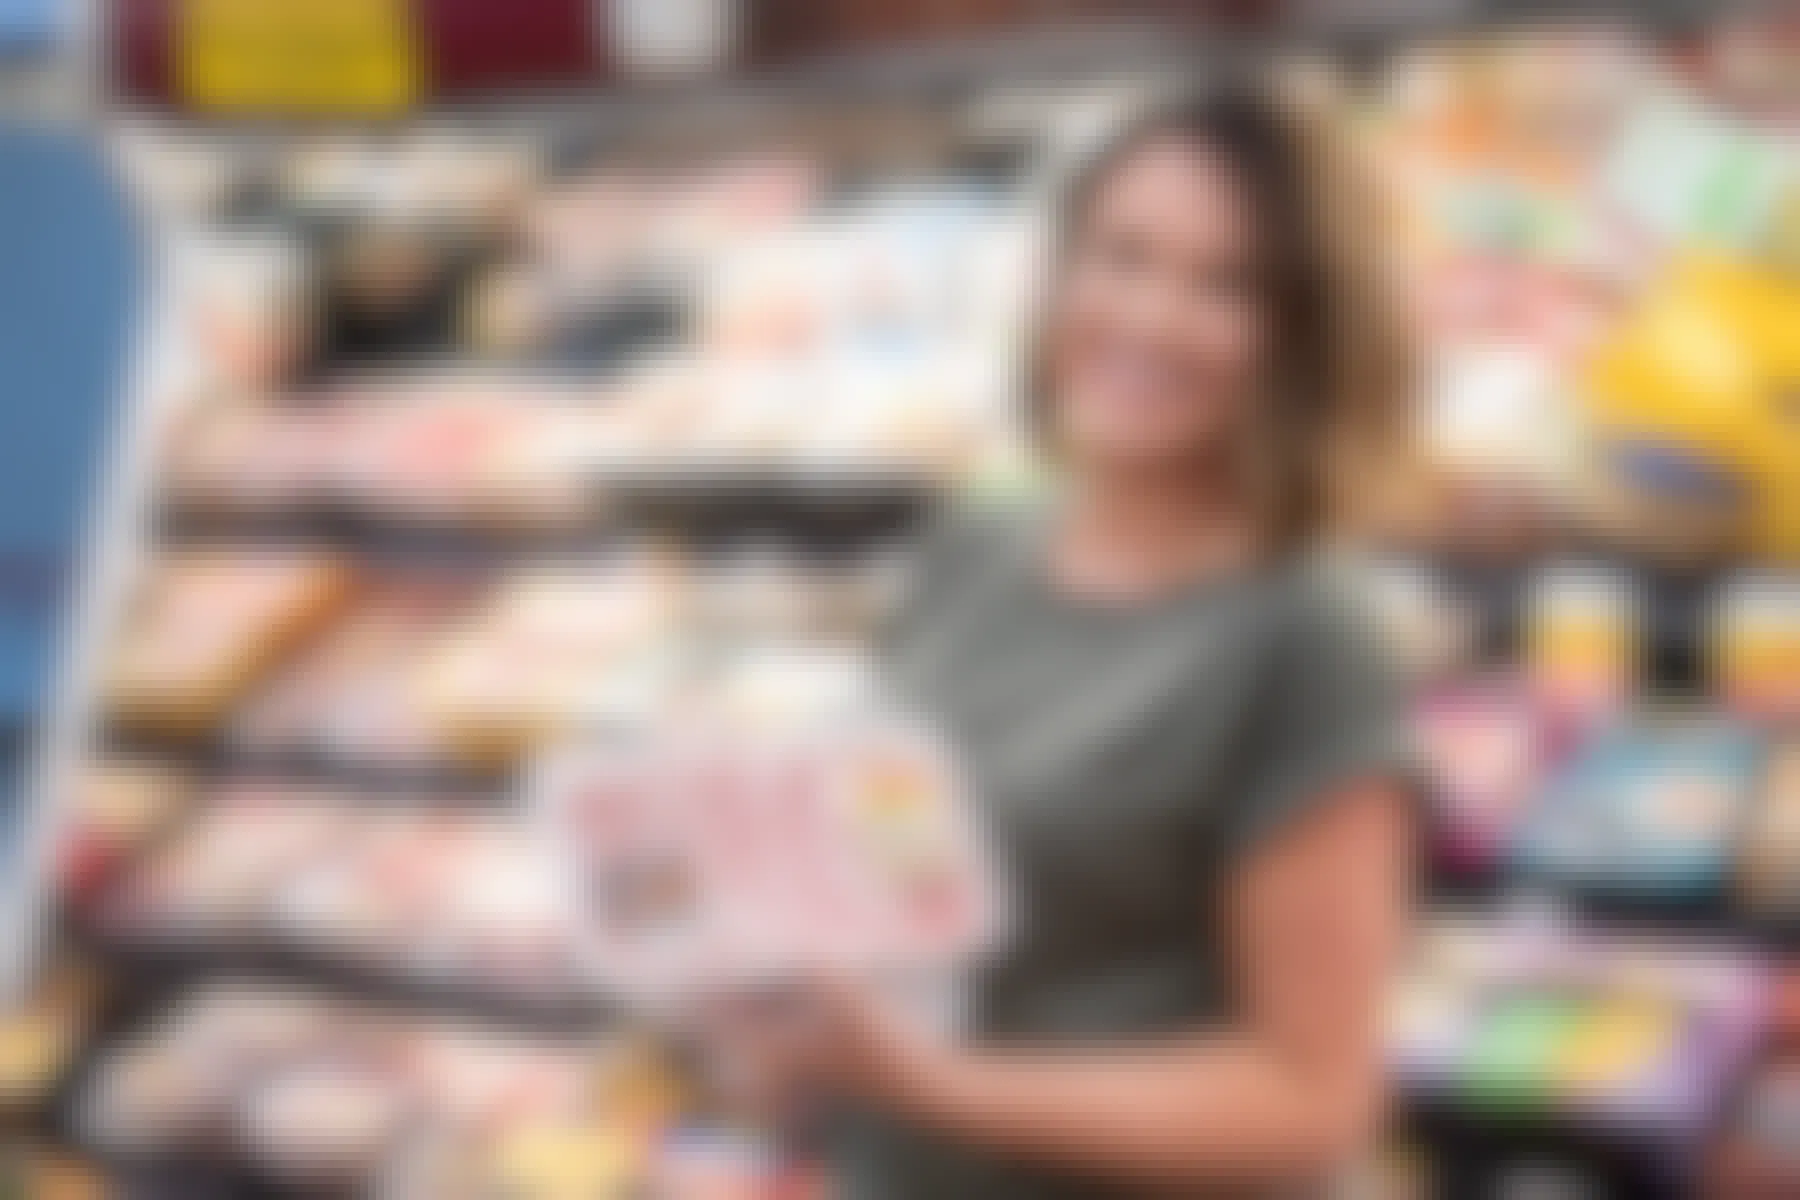 A woman smiling while holding up a few packages of pork chops in a grocery store.